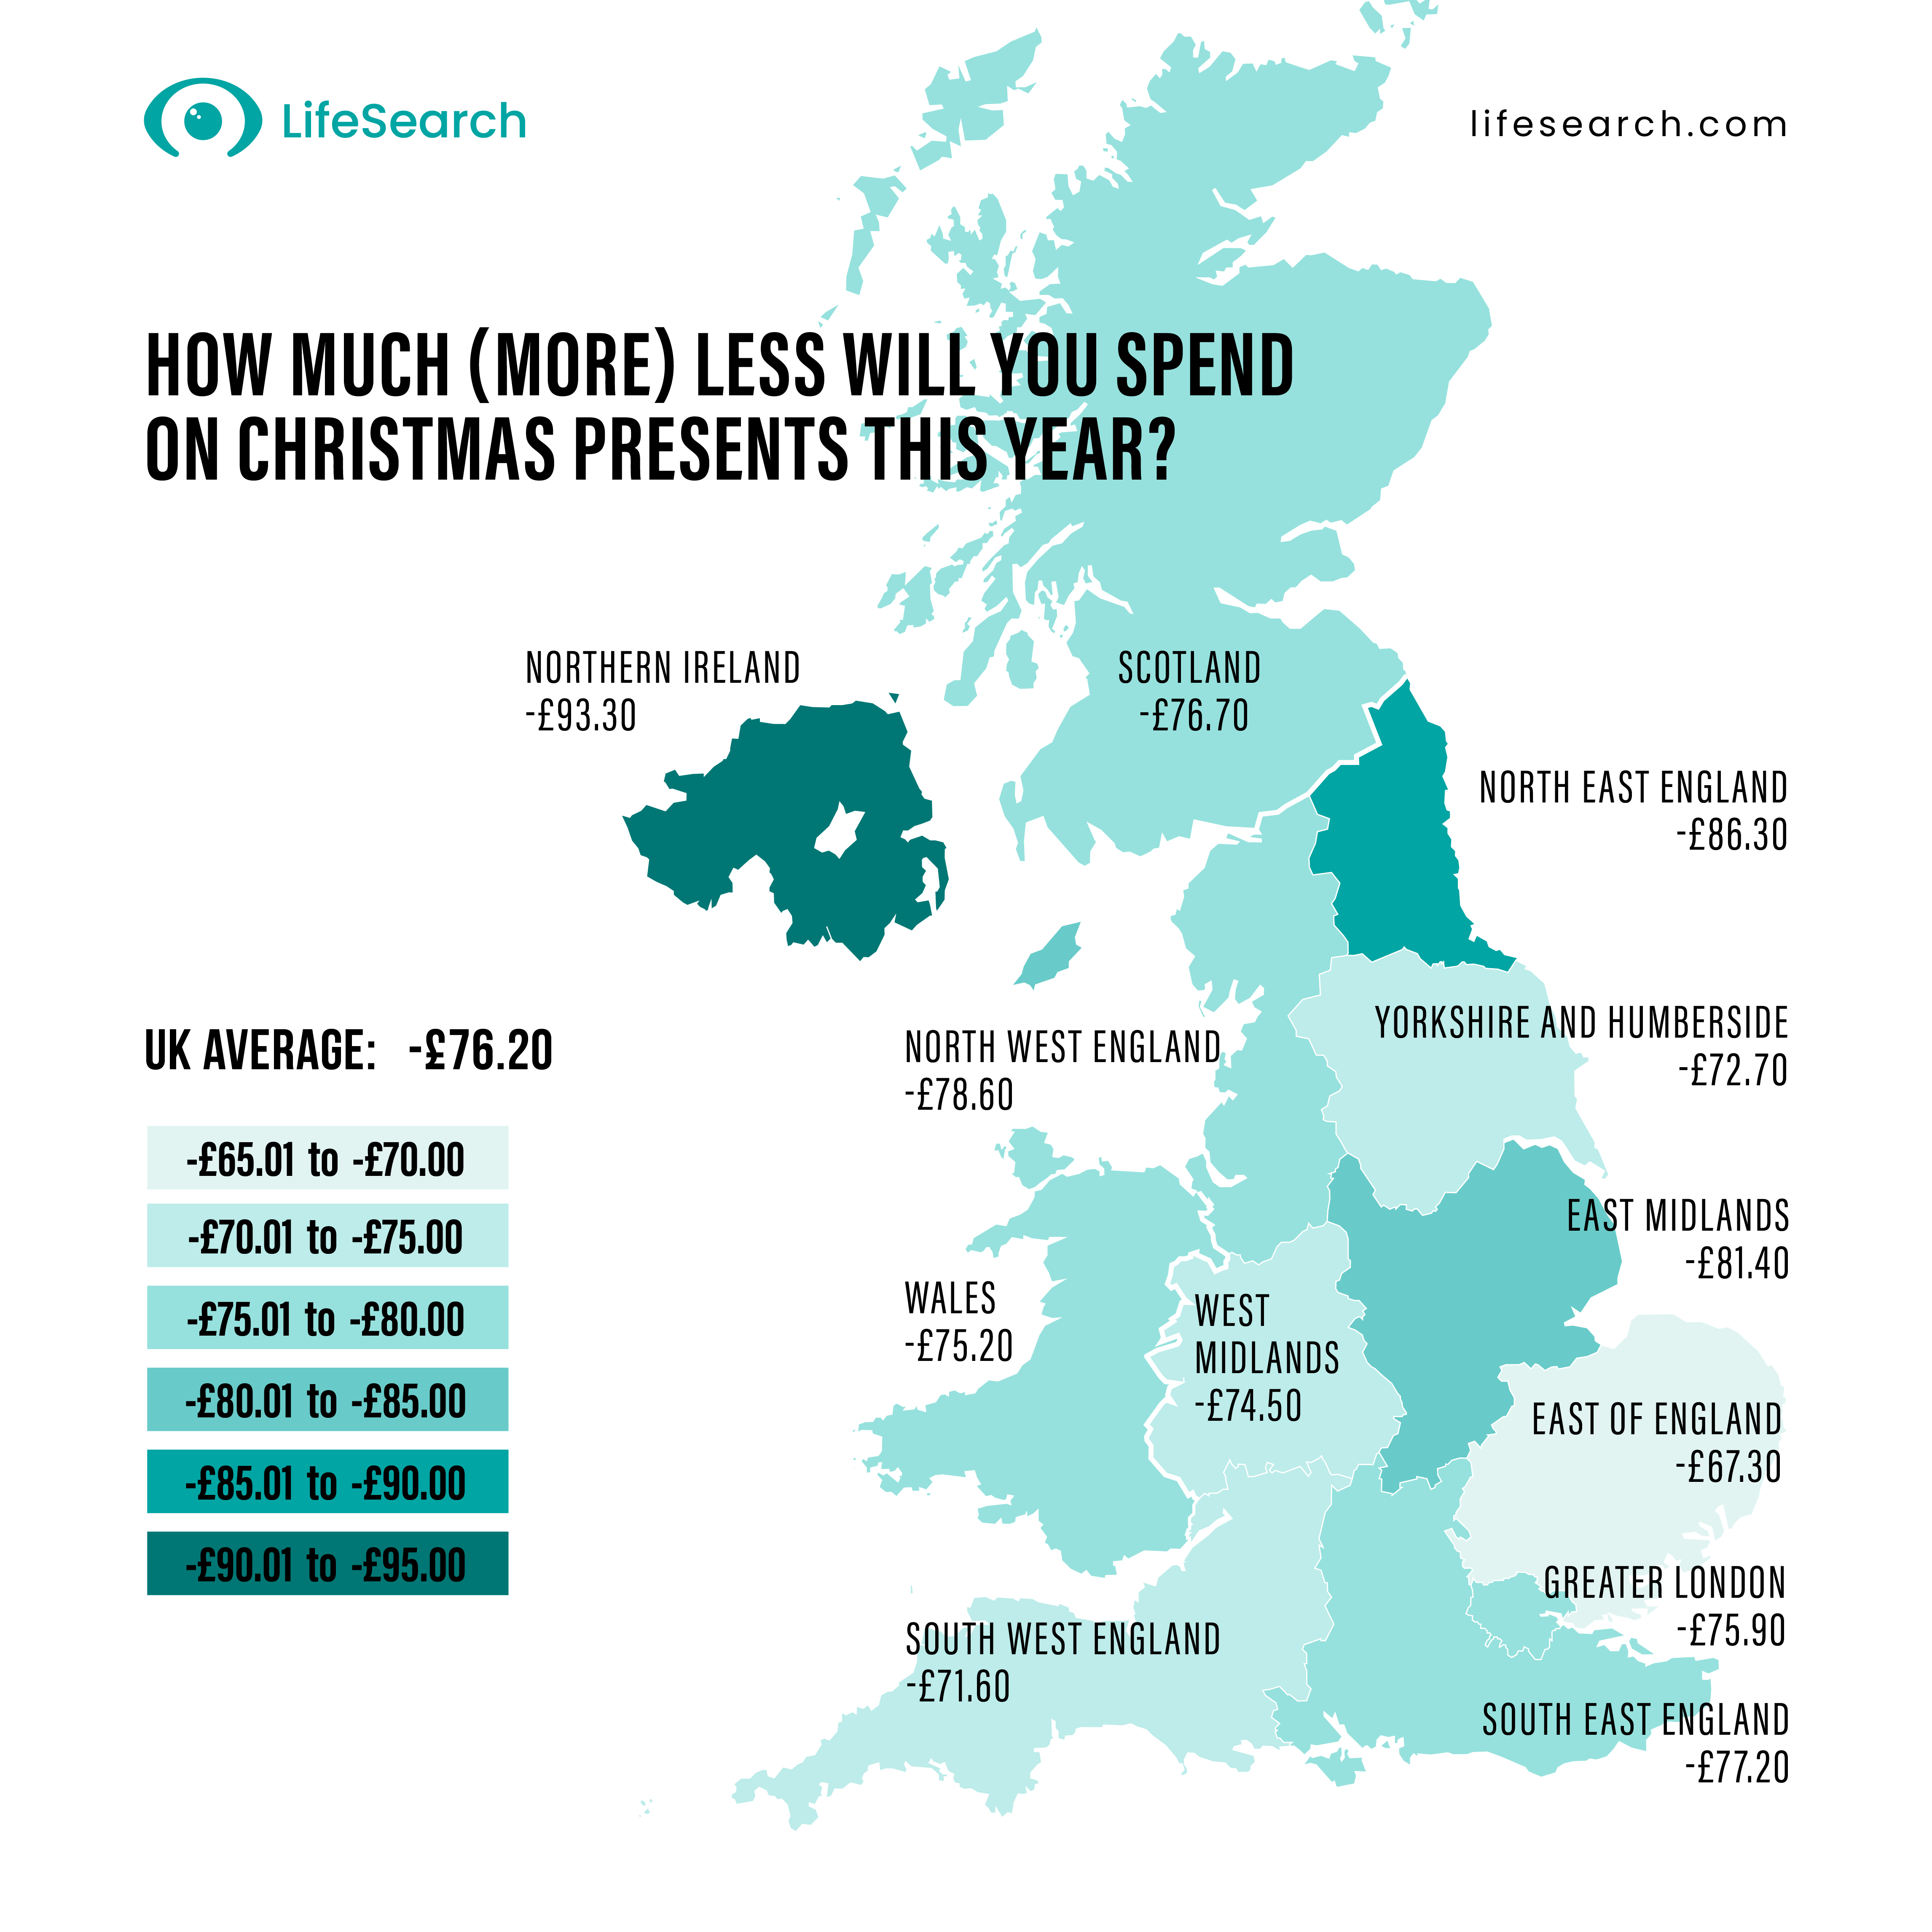 Map of UK showing how much more or less people will be spending on Christmas